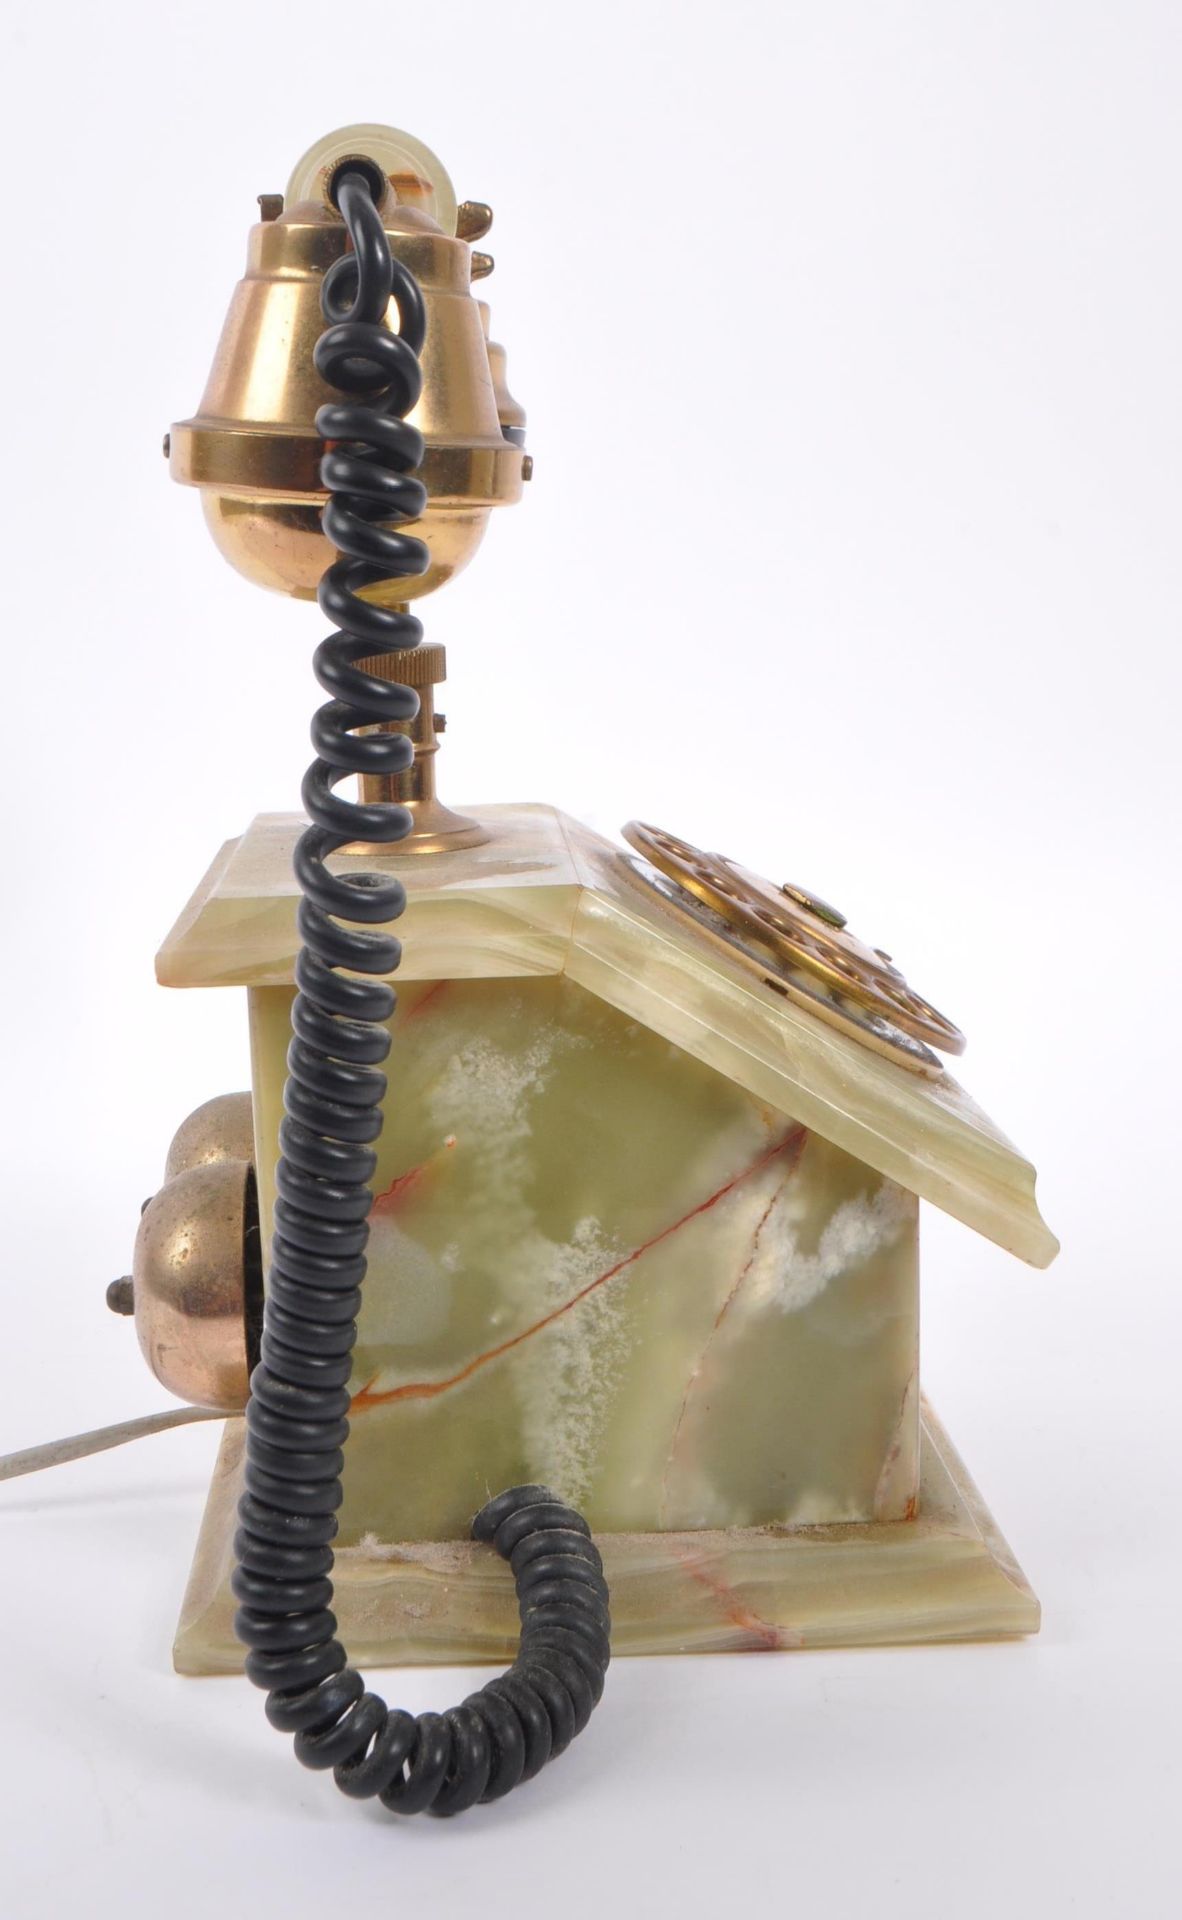 VINTAGE CIRCA. 1930S ONYX AND BRASS ROTARY DIAL TELEPHONE - Image 2 of 6